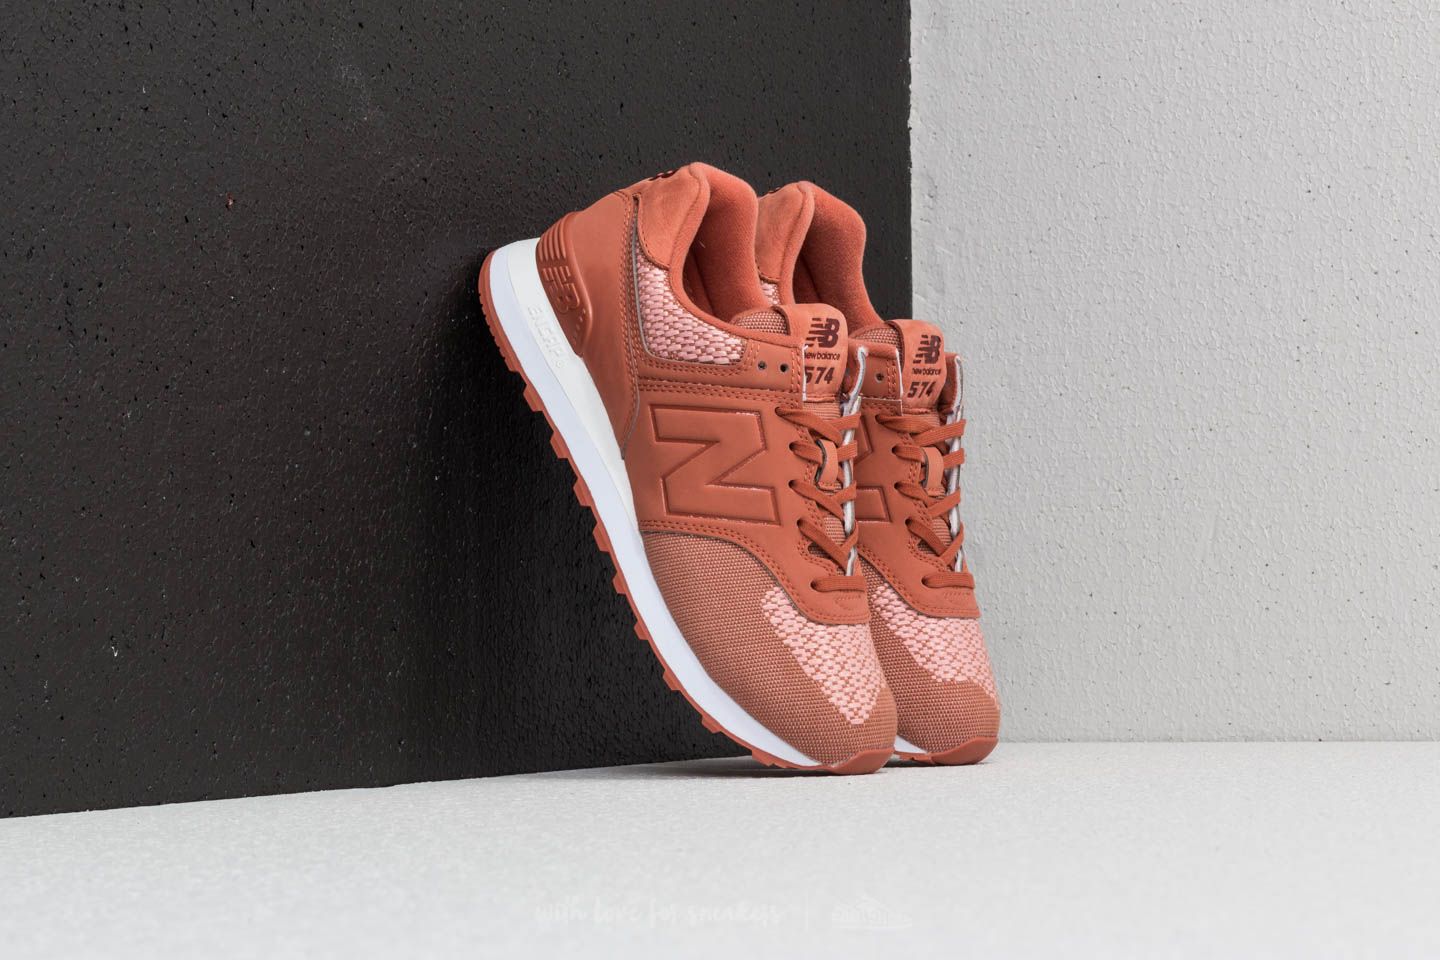 Chaussures et baskets femme New Balance 574 Dusted Peach